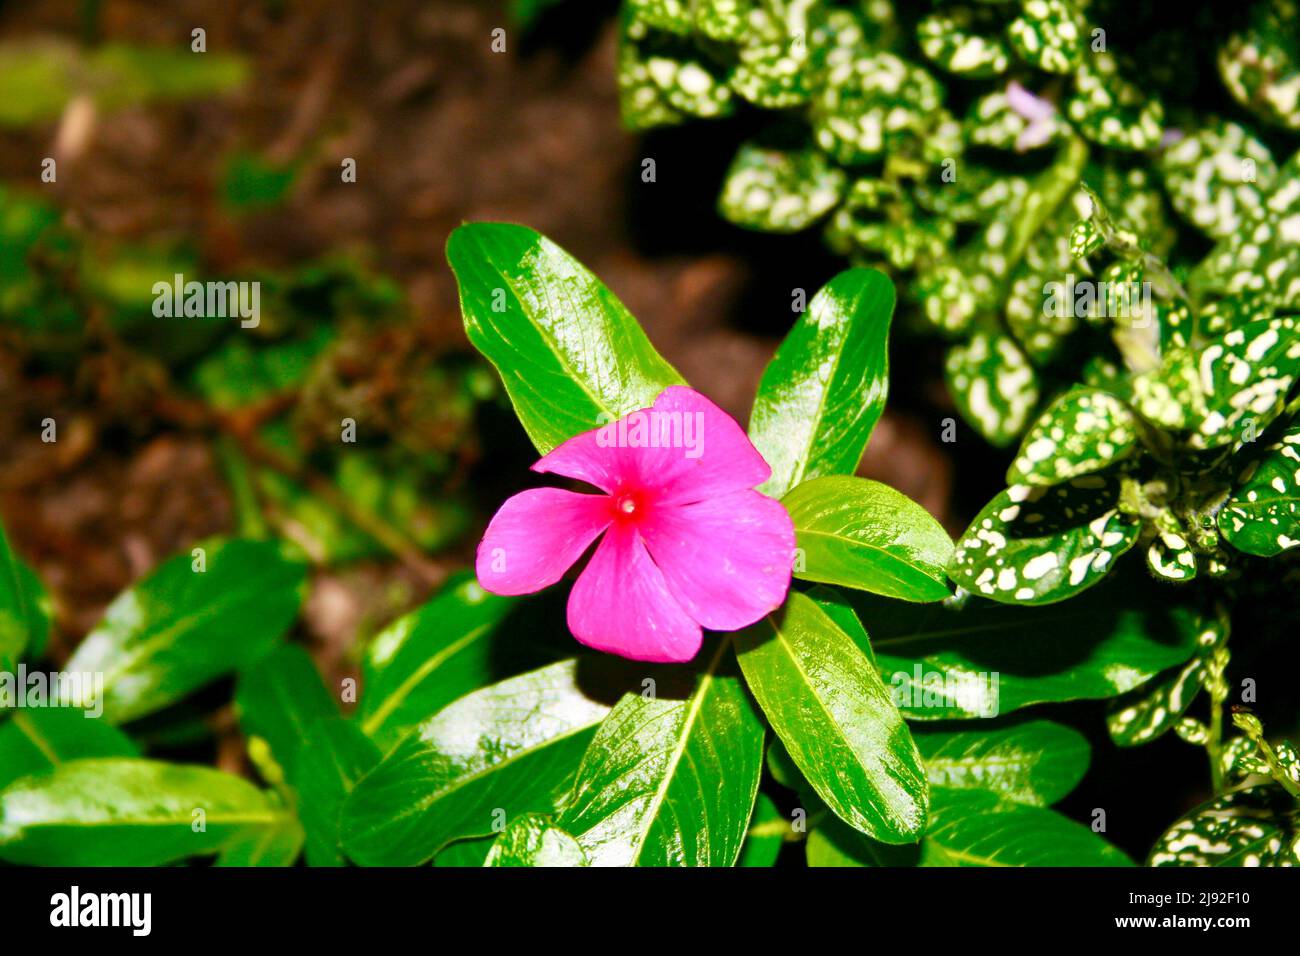 Small pink flower on bright green plant Stock Photo